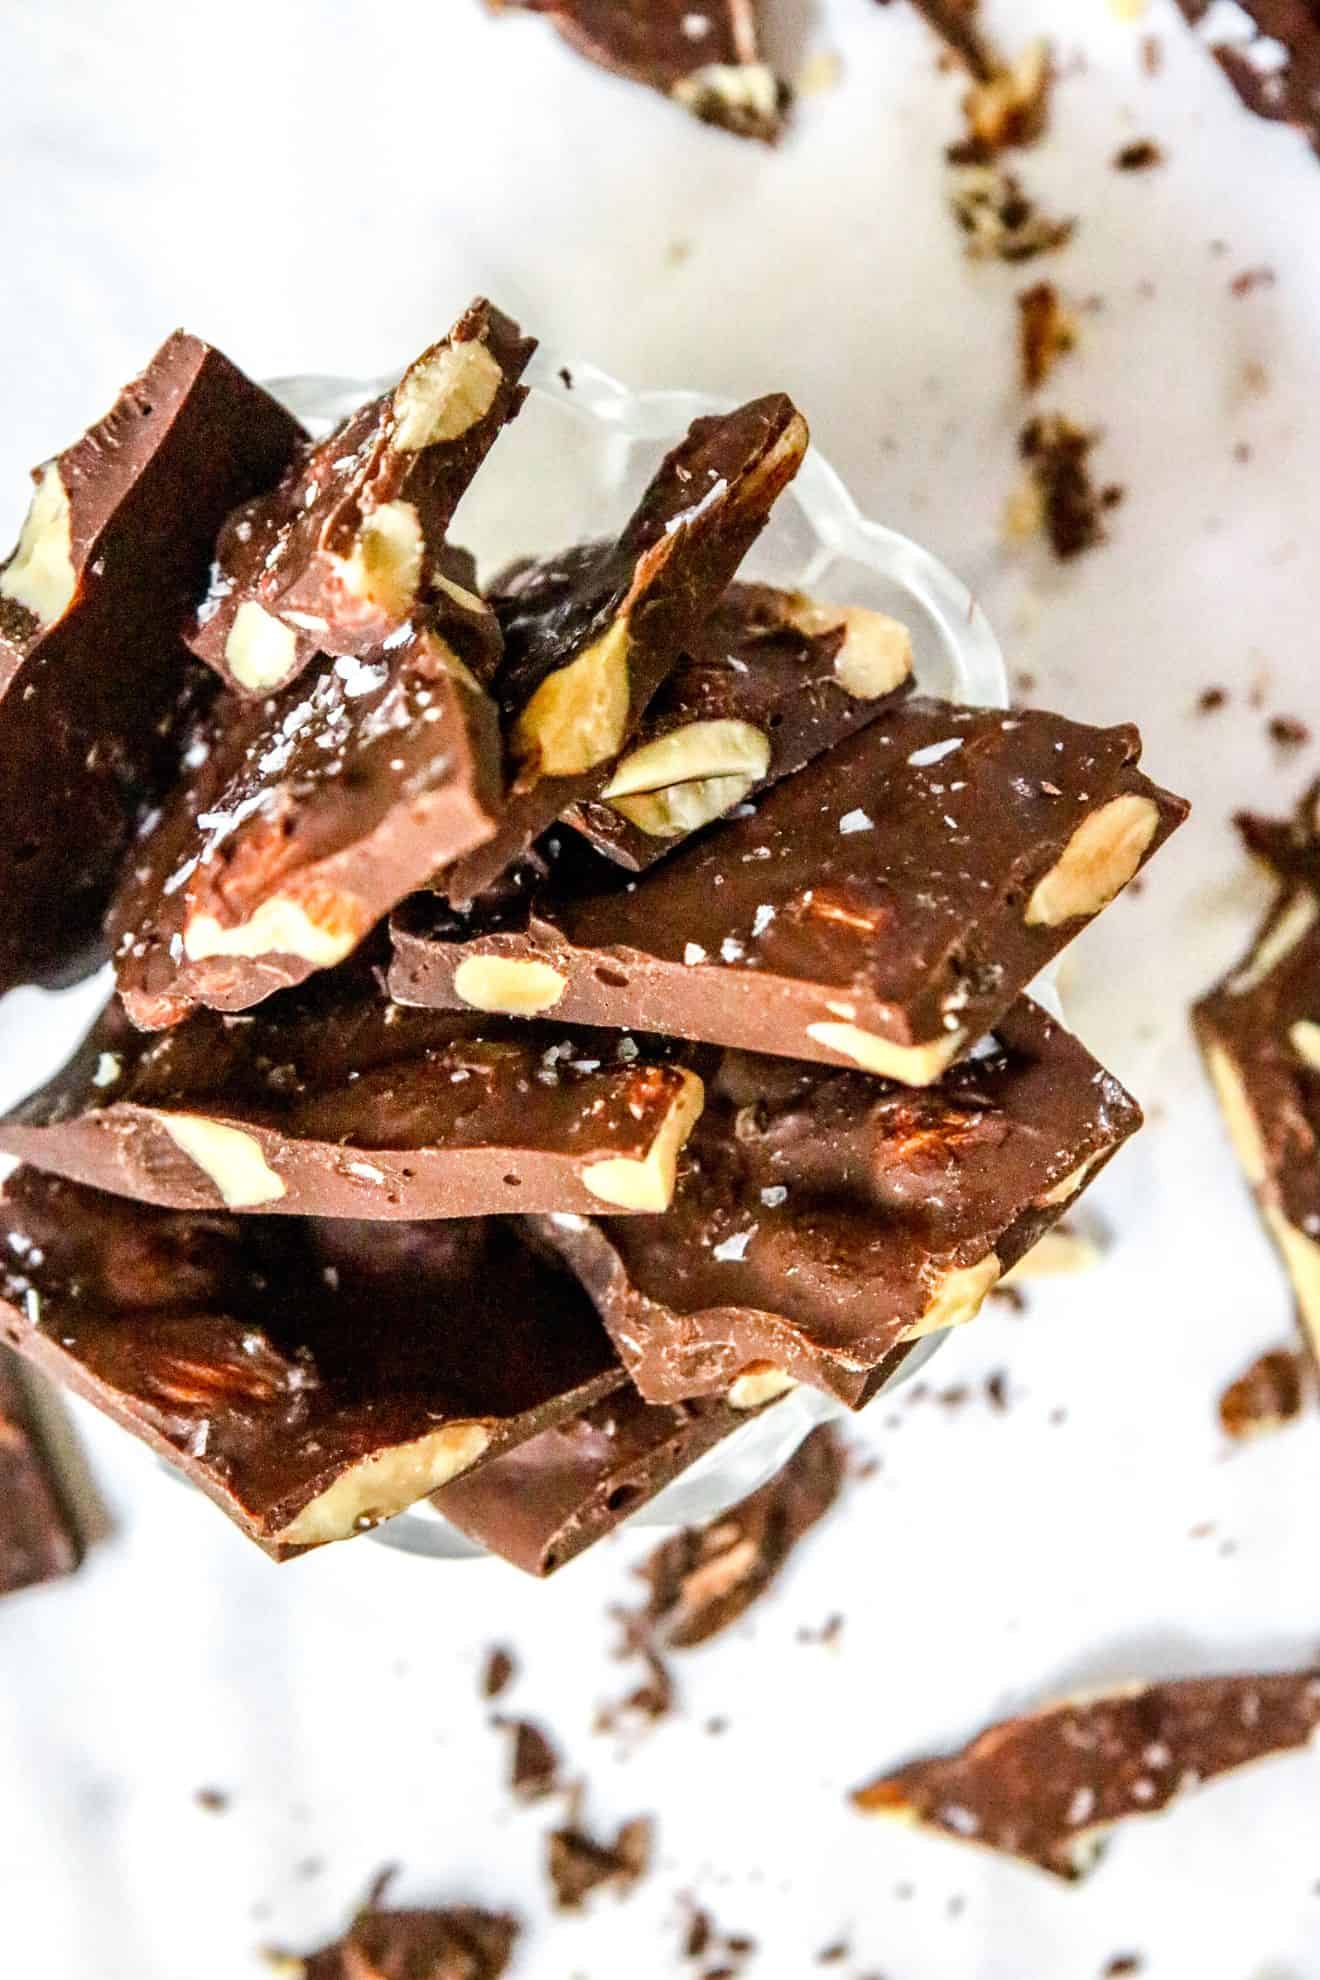 This is an overhead image of chocolate bark with almonds and flakey salt on top. The bark pieces are in a small glass bowl sitting on a white marble counter. Small pieces of bark and crumbs are scattered around the bowl.